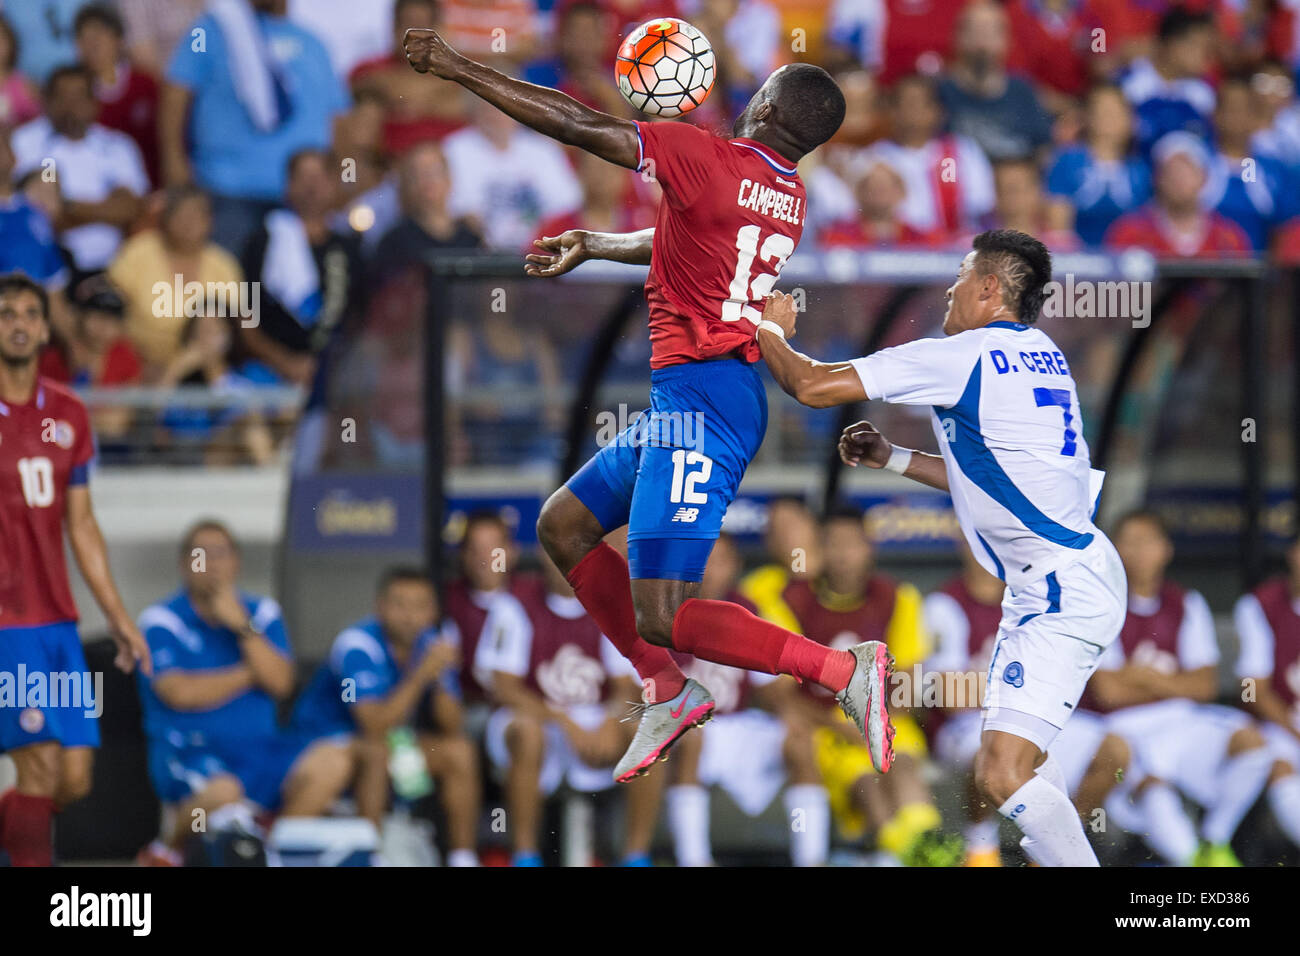 July 11, 2015: Costa Rica forward Joel Campbell (12) controls the ball in front of El Salvador midfielder Darwin Ceren (7) during the 1st half of an international CONCACAF Gold Cup soccer match between Costa Rica and El Salvador at BBVA Compass Stadium in Houston, TX. The game ended in a 1-1 draw. Credit:  Cal Sport Media/Alamy Live News Stock Photo